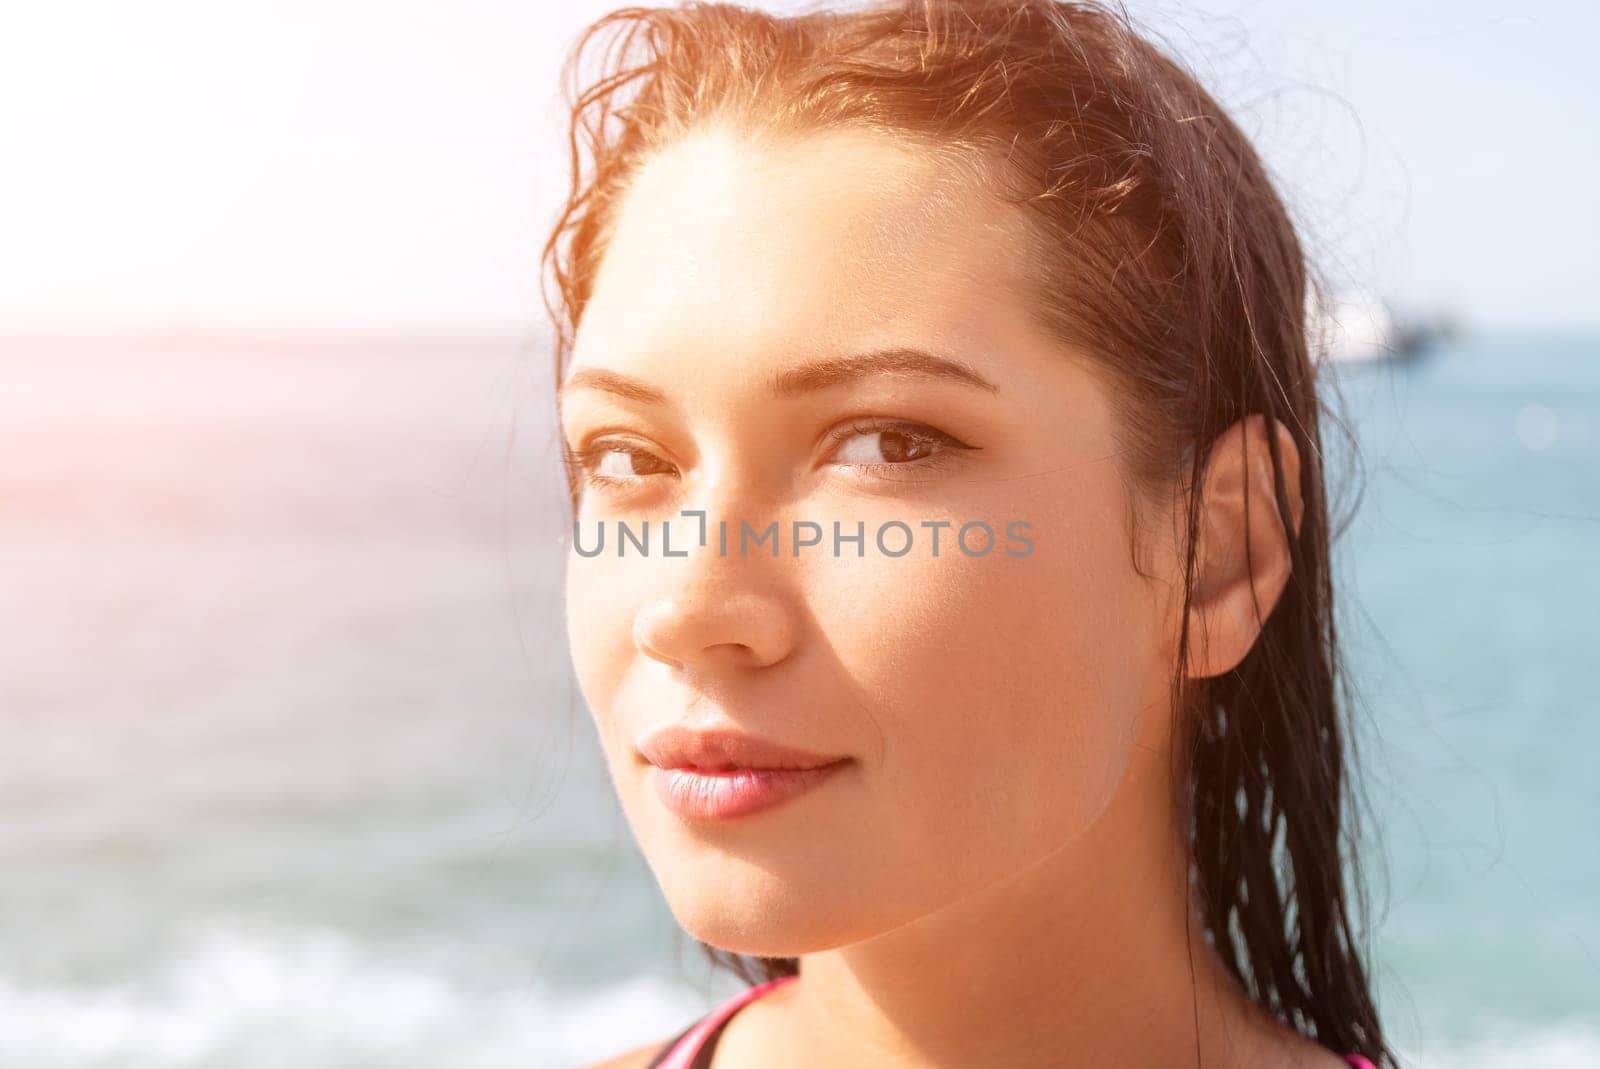 Woman sea sup. Close up portrait of beautiful young caucasian woman with black hair and freckles looking at camera and smiling. Cute woman portrait in a pink bikini posing on sup board in the sea